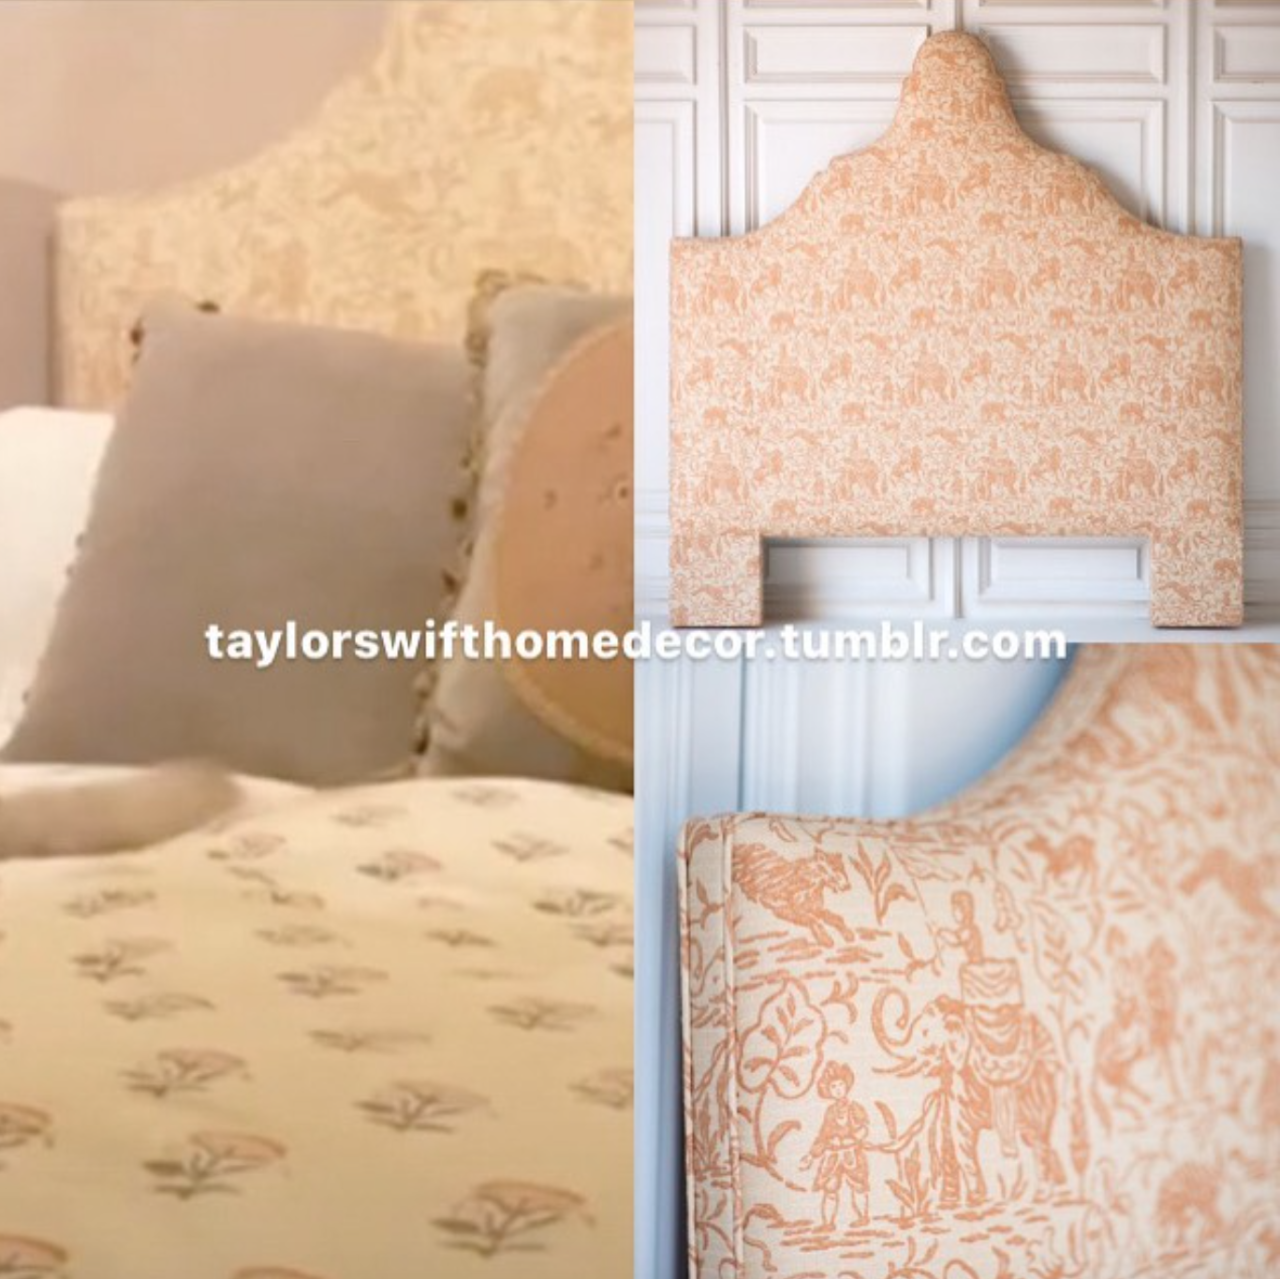 Taylor Swift Home Decor — folklore Pond Studio Sessions documentary